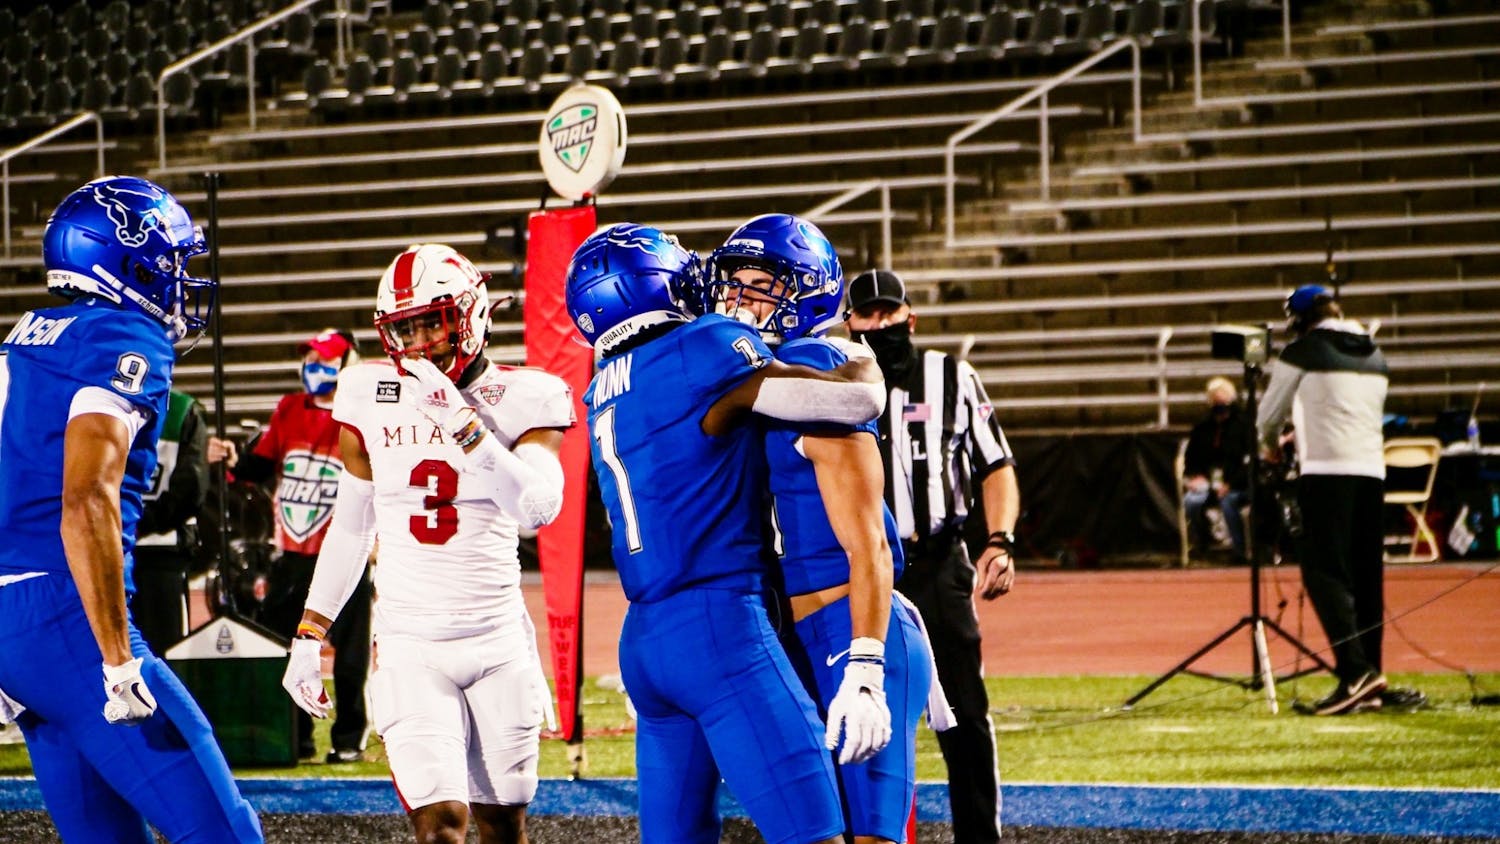 Senior wide receivers Antonio Nunn (1) and Jovany Ruiz (41) celebrate after a UB touchdown.